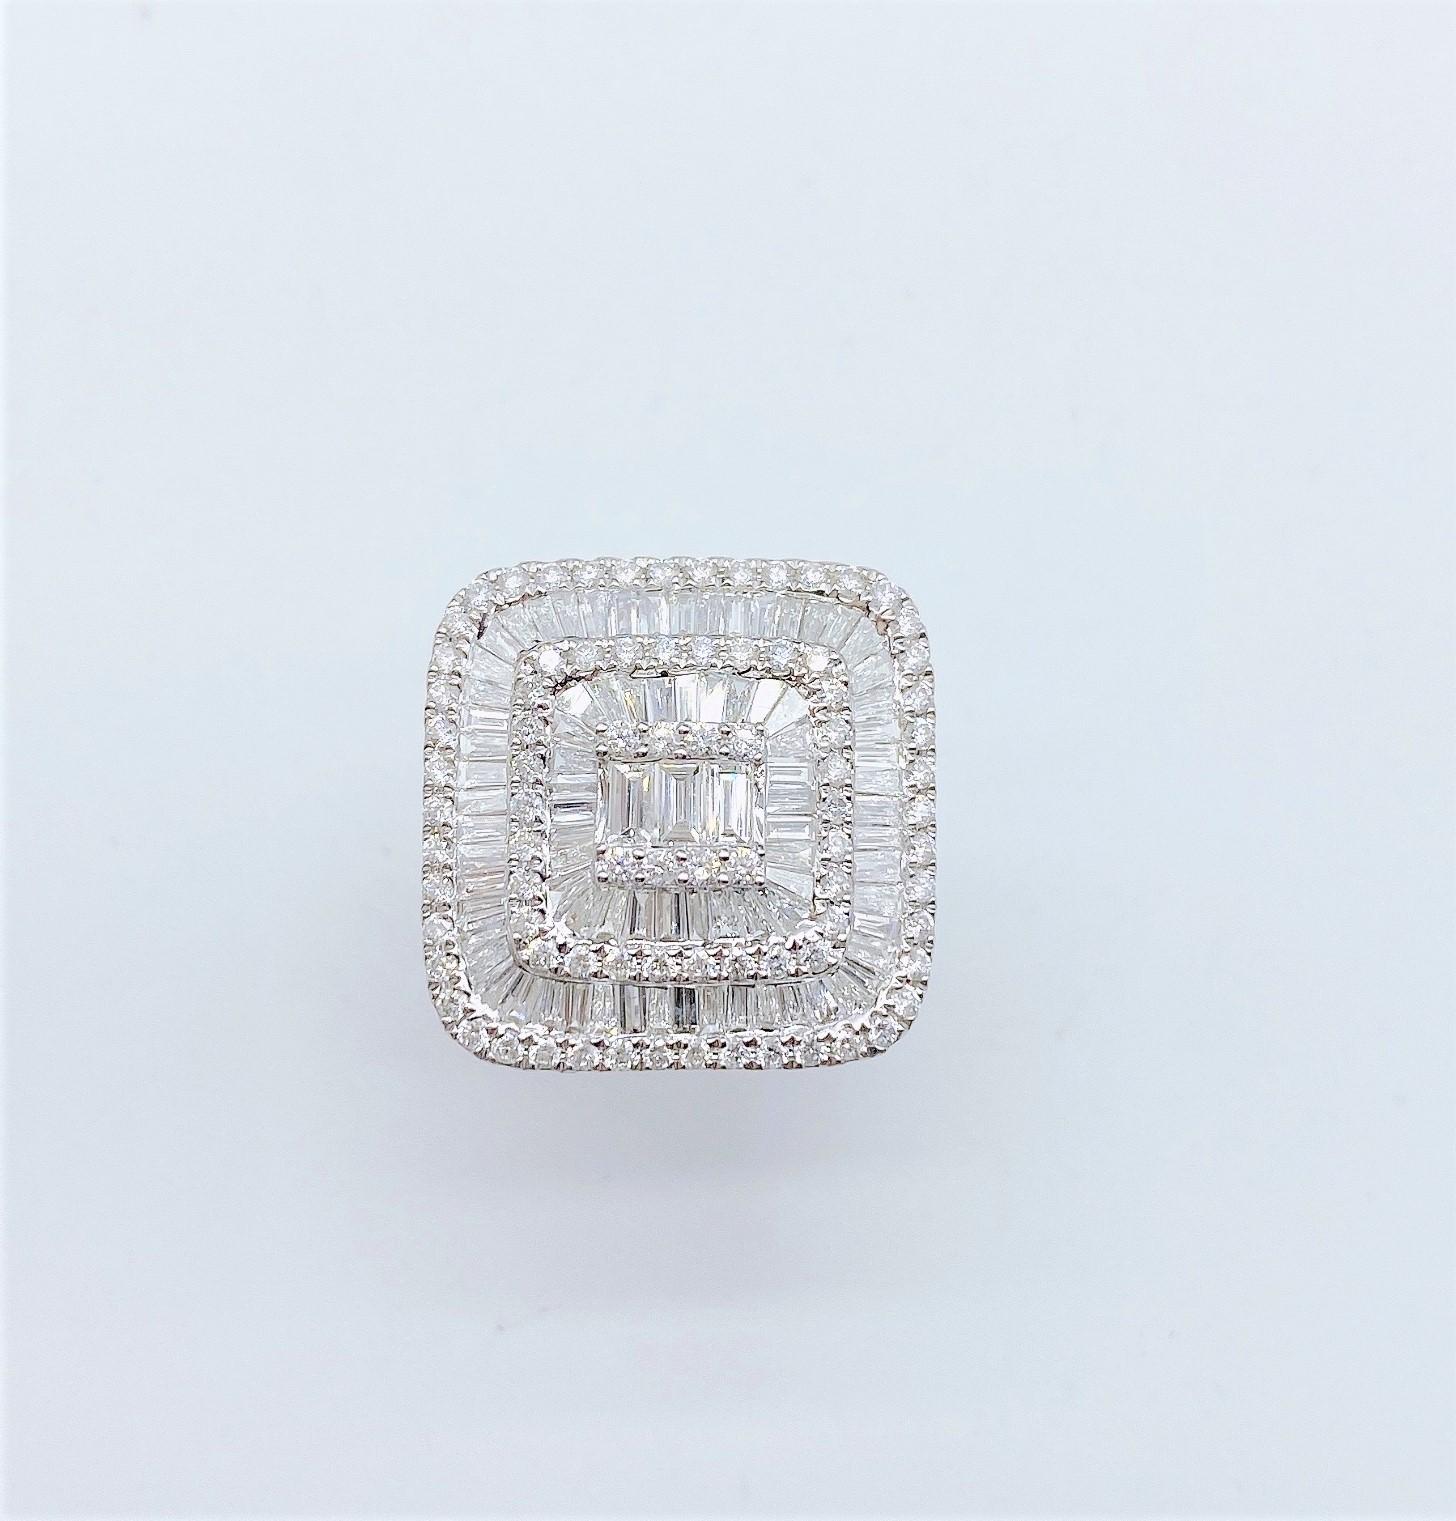 The Following Item we are offering is a Rare Important Radiant 18KT GOLD LARGE TRILLION BAGUETTE CUT AND ROUND CUT DIAMOND RING. Ring is comprised with Gorgeous Finely Set Trillion Baguette Cut Diamonds Framed with Gorgeous Glittering Round